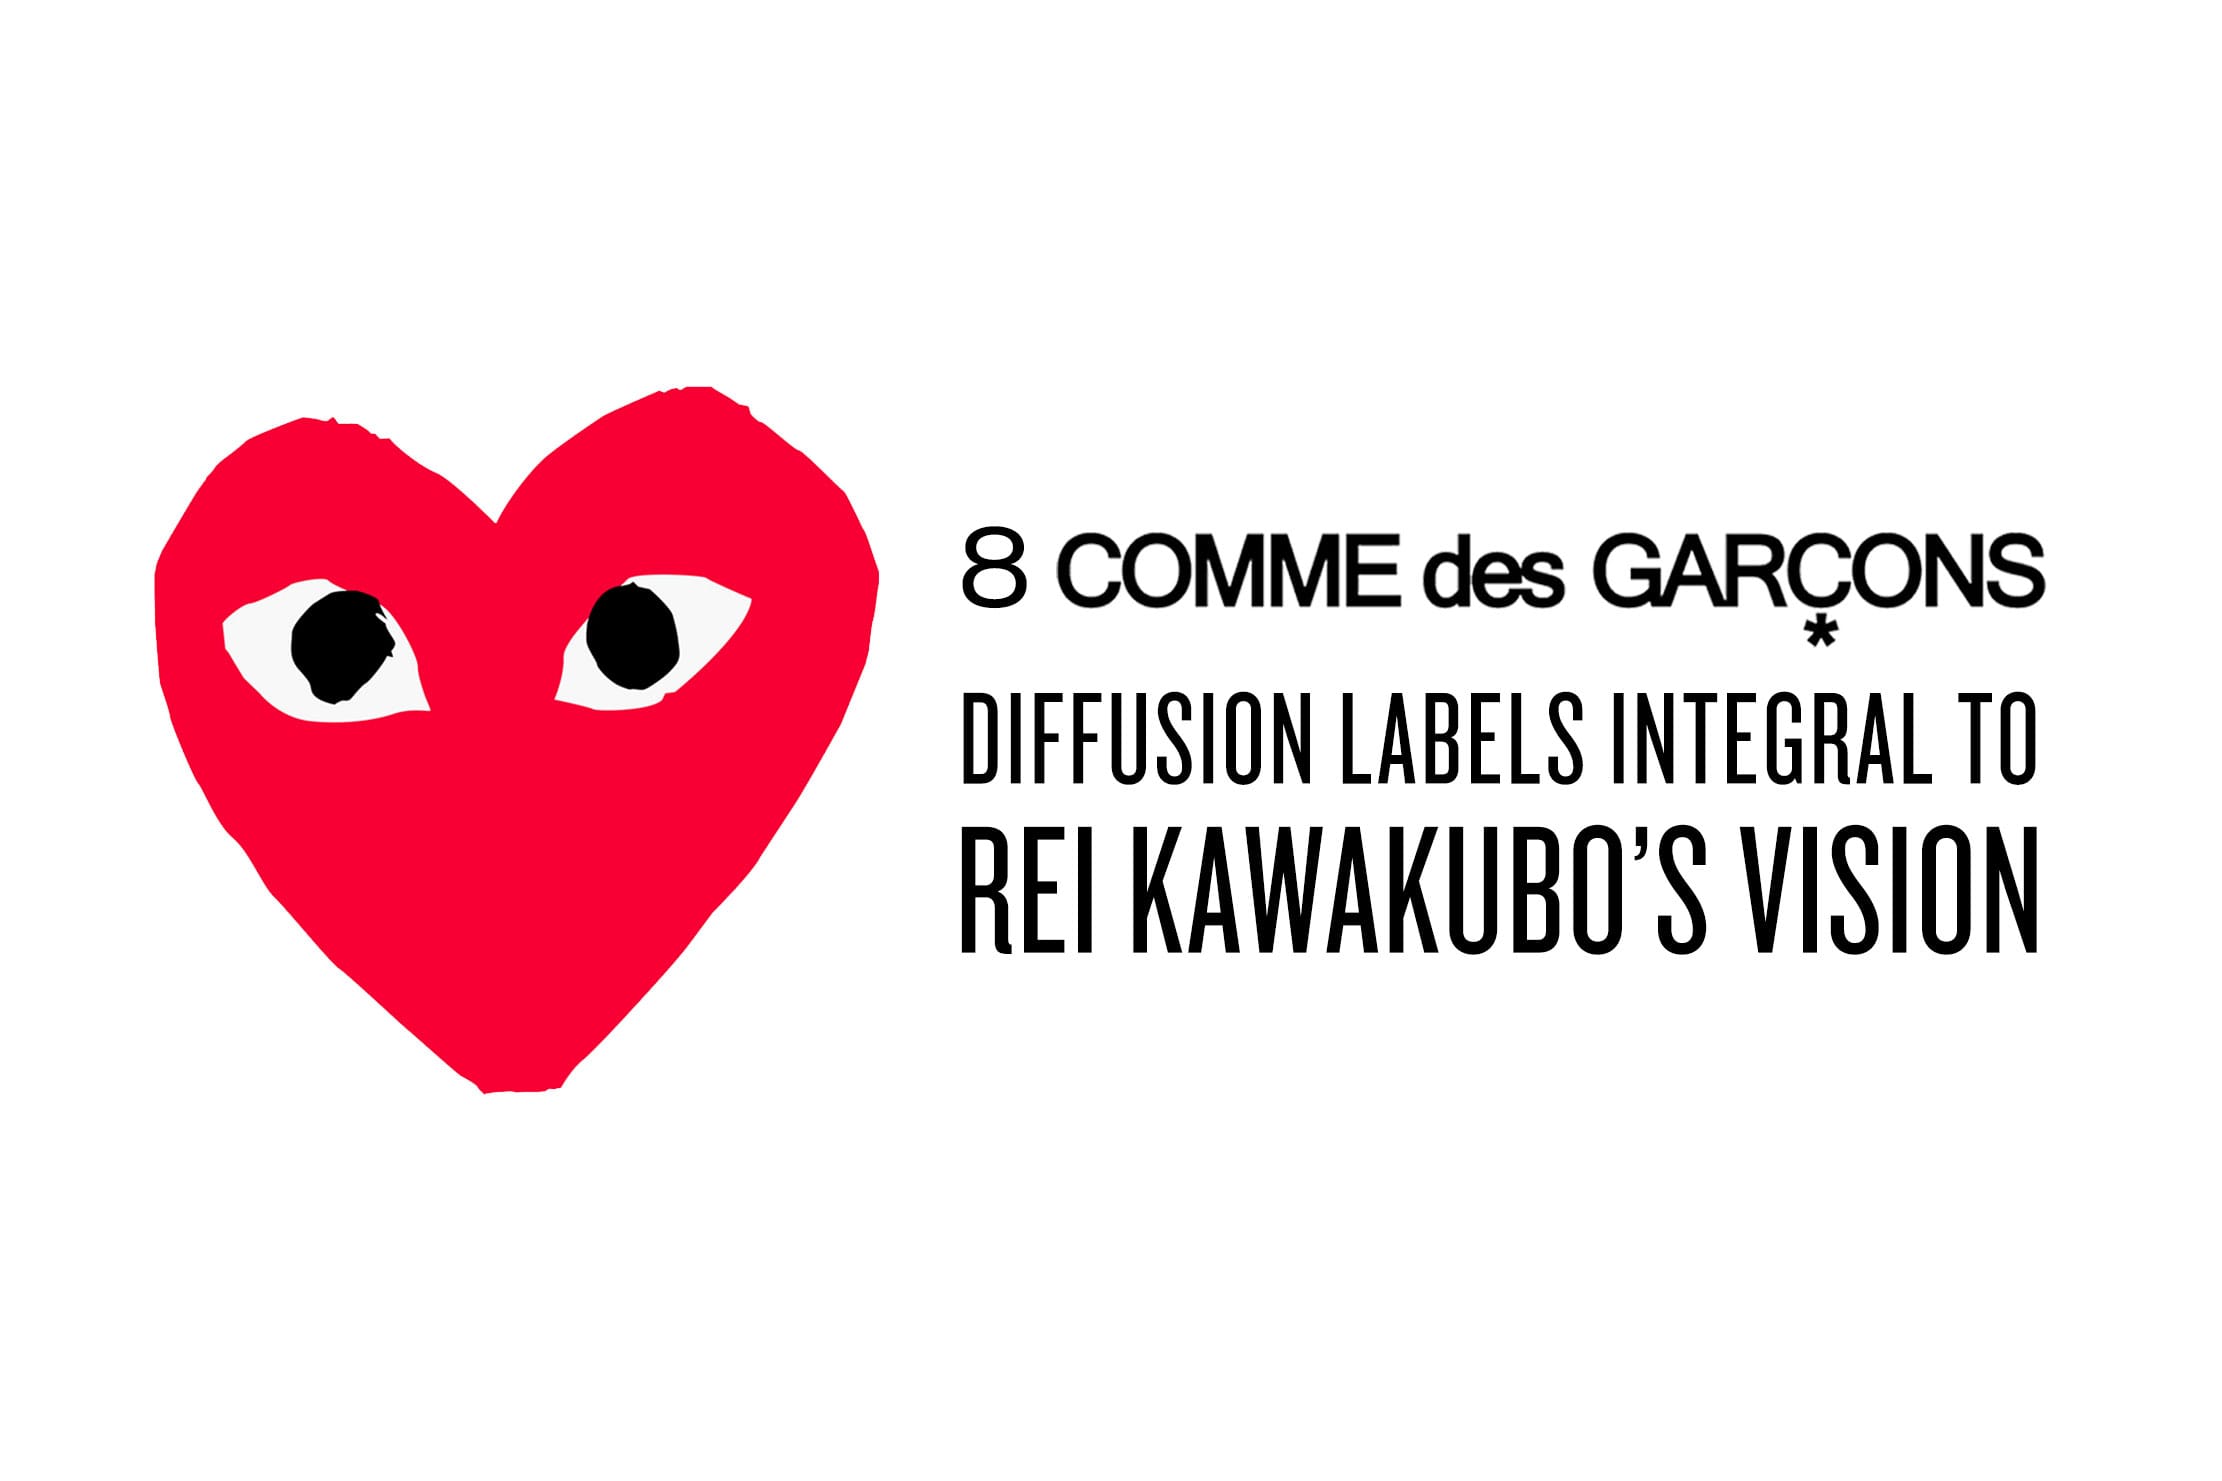 cdg shirt meaning